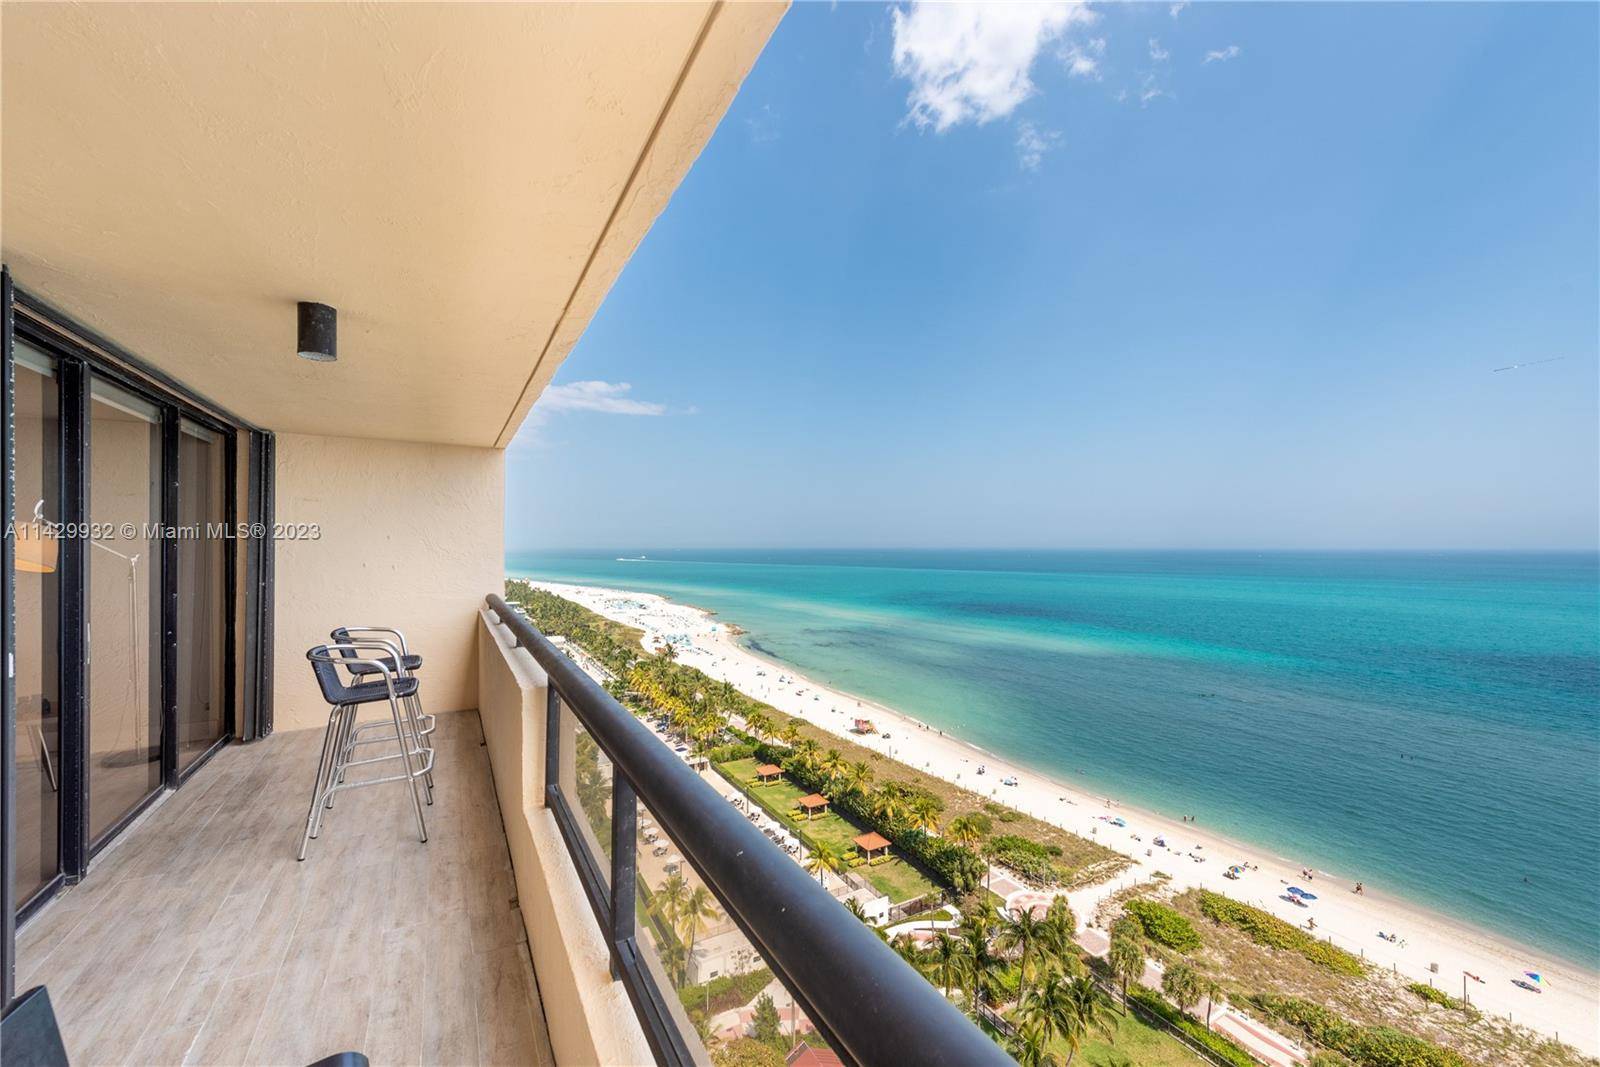 Stunning condo boasts direct ocean views and over 100K in upgrades.